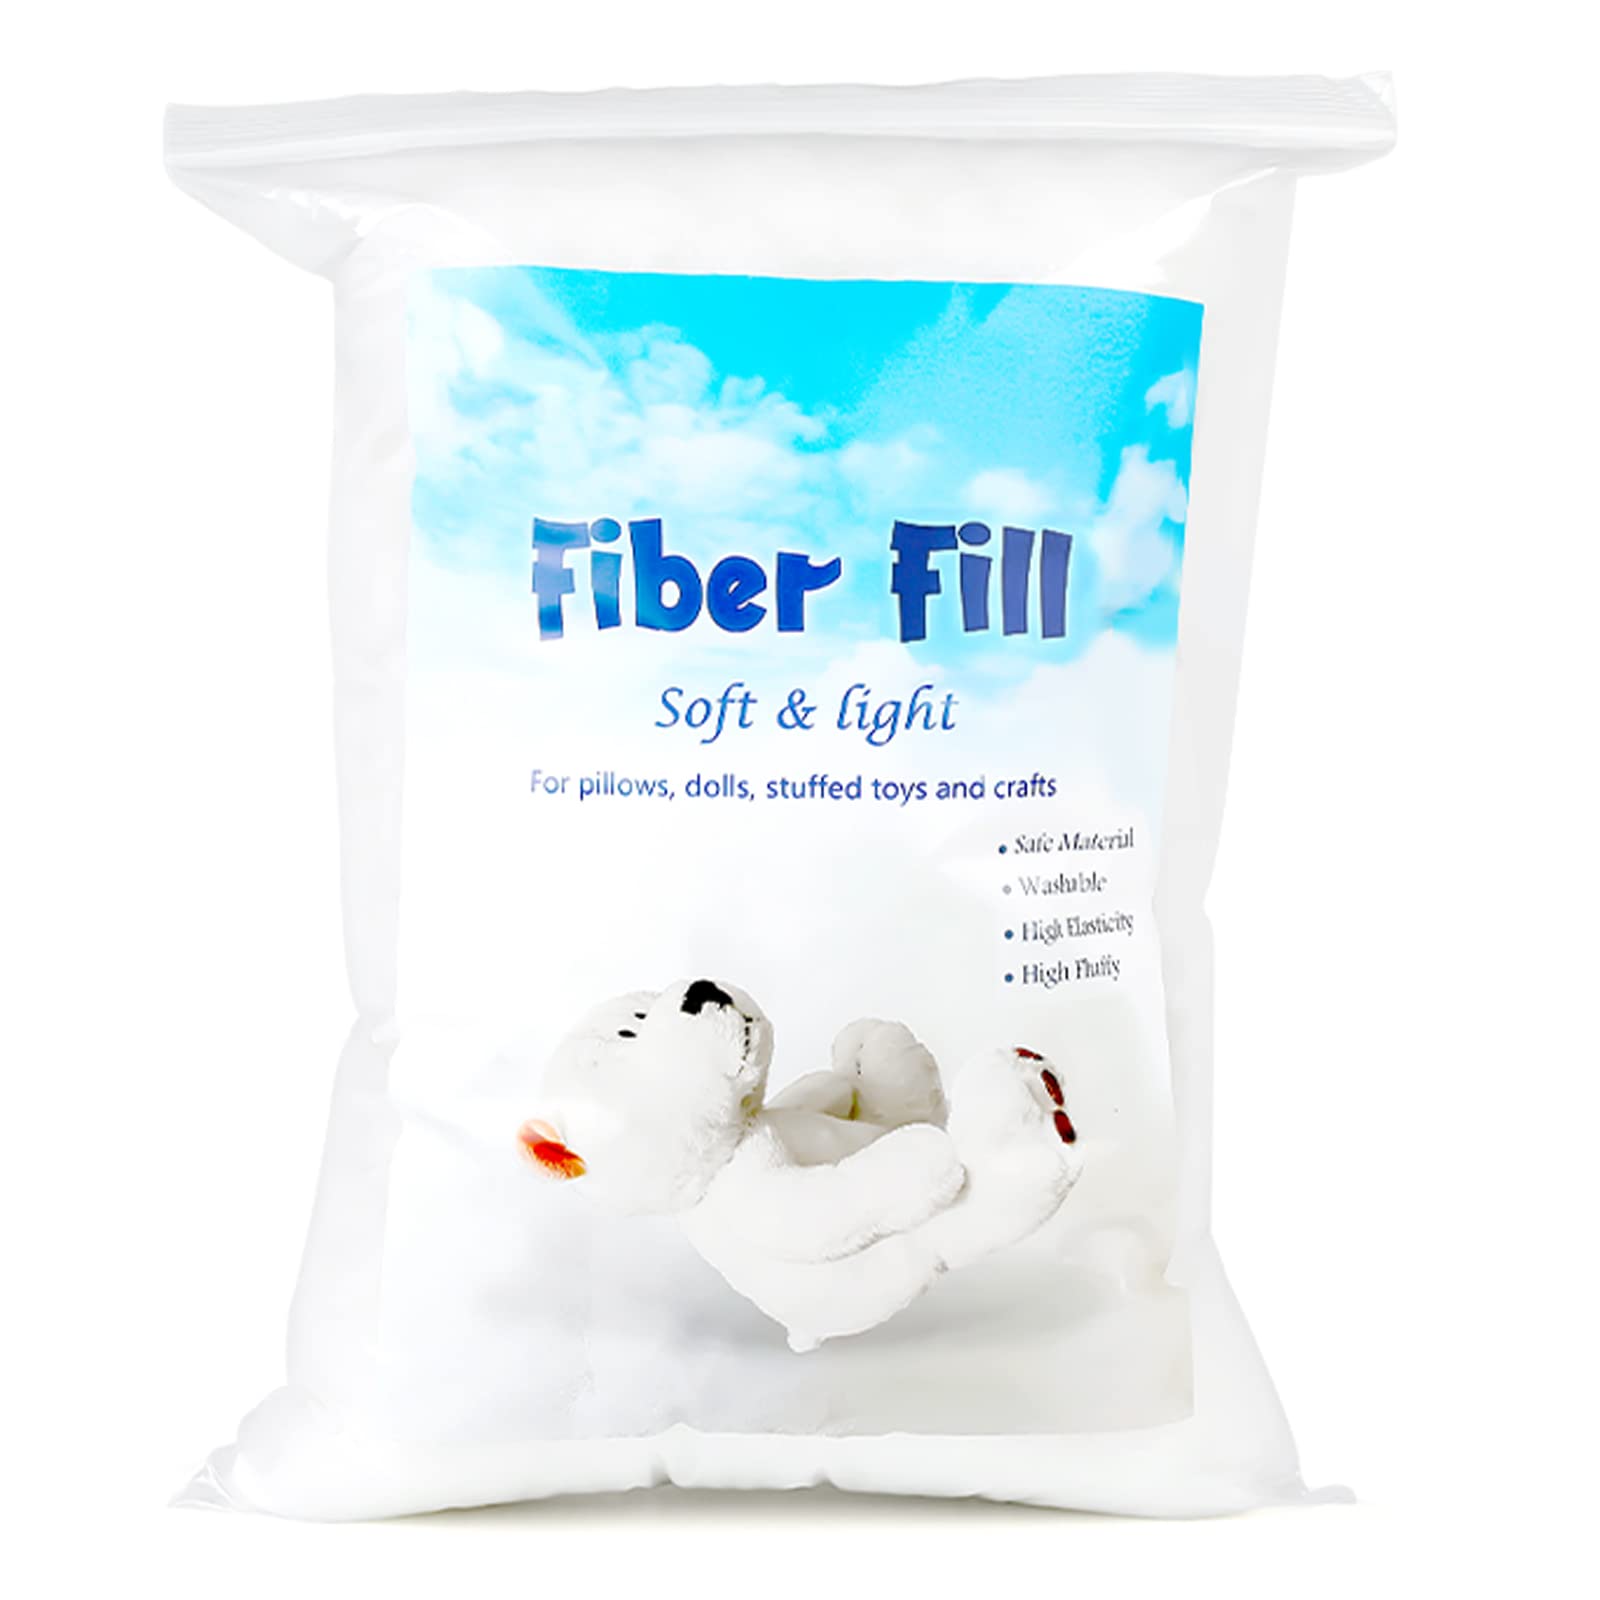 5 LB LAMBSWOOL Natural White Clean Fluffy Classic Fiber for Toy Stuffing &  Filling Pillows, Doll Making, Premium Hypoallergenic Fiber Fill. -   Sweden